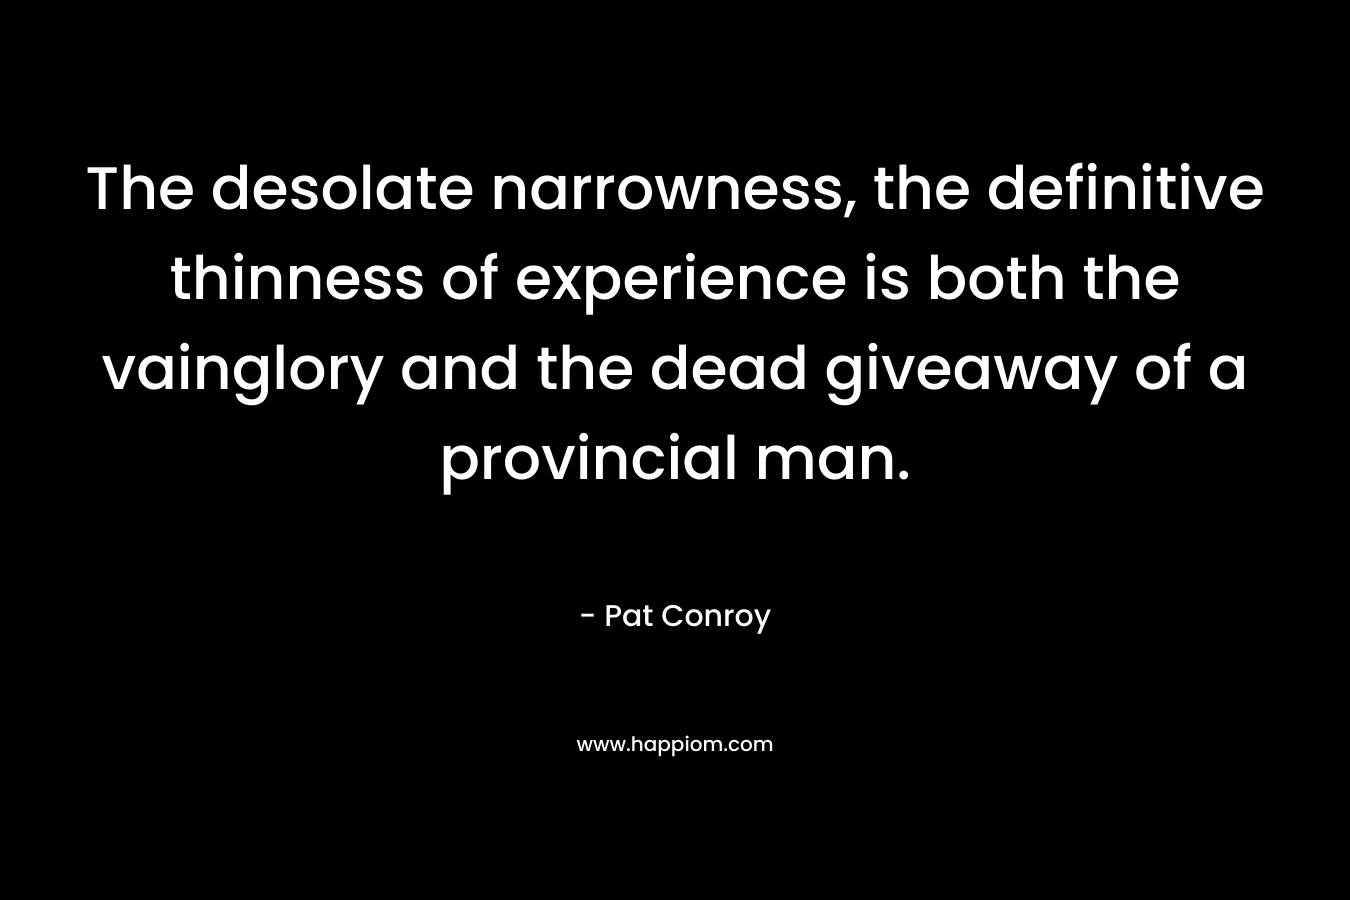 The desolate narrowness, the definitive thinness of experience is both the vainglory and the dead giveaway of a provincial man.